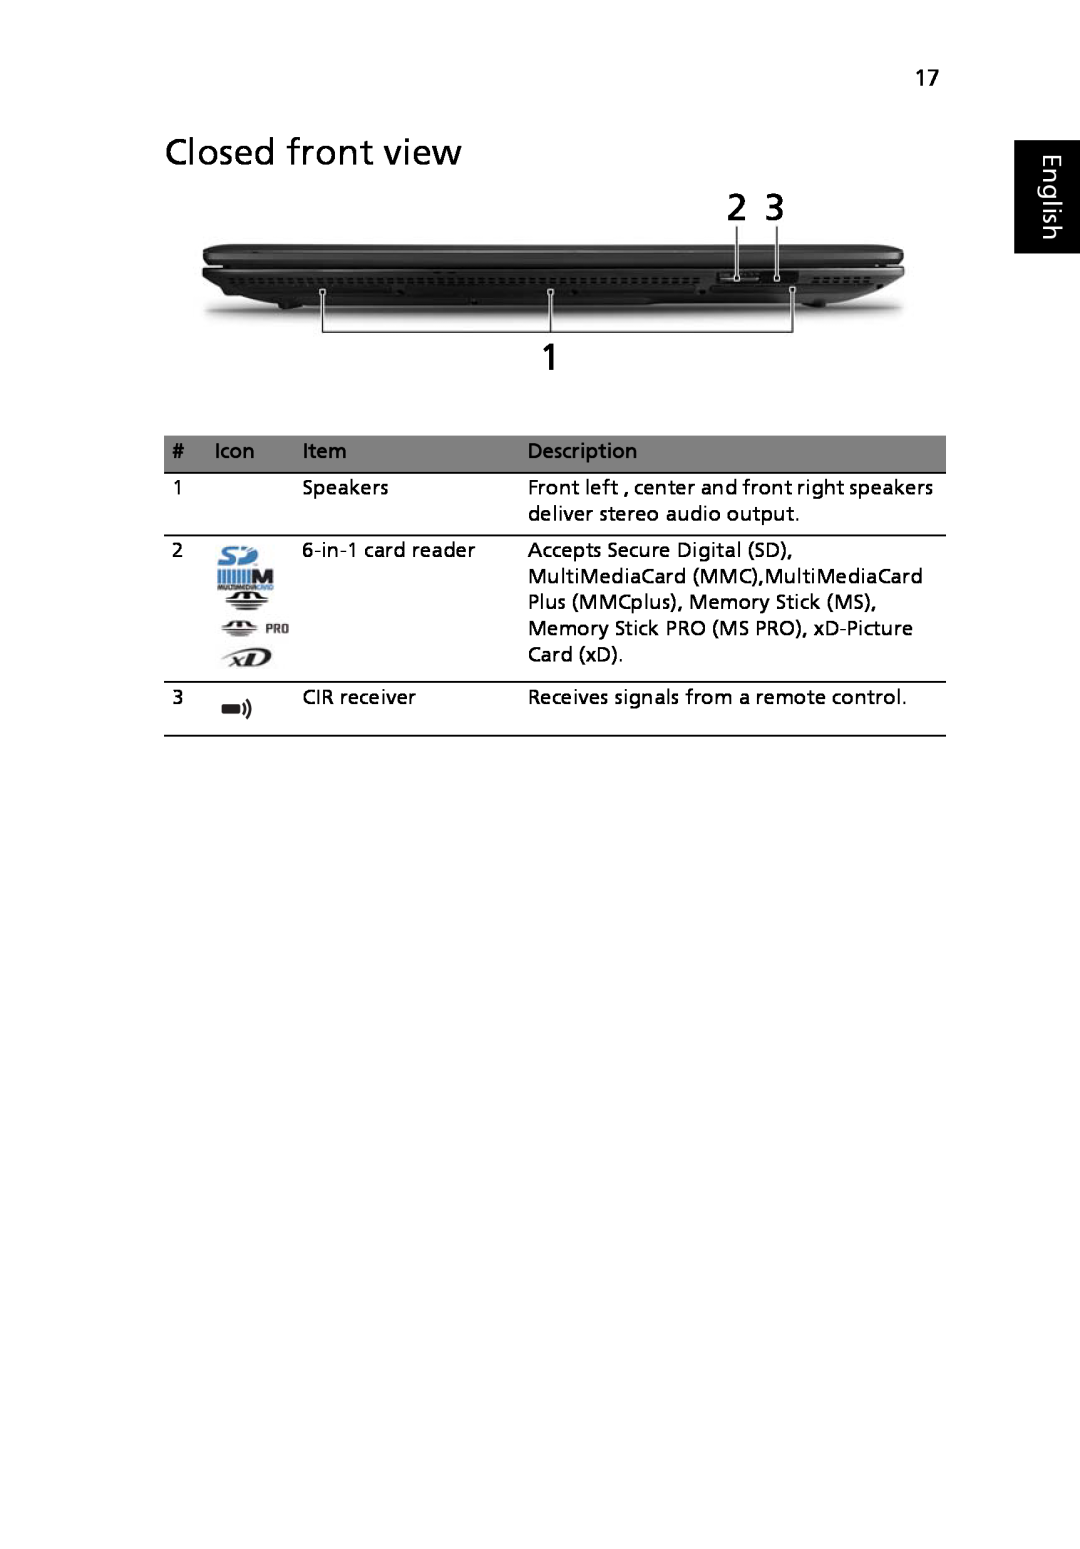 Acer LE1, 8920 Series manual Closed front view, English, # Icon, Description 